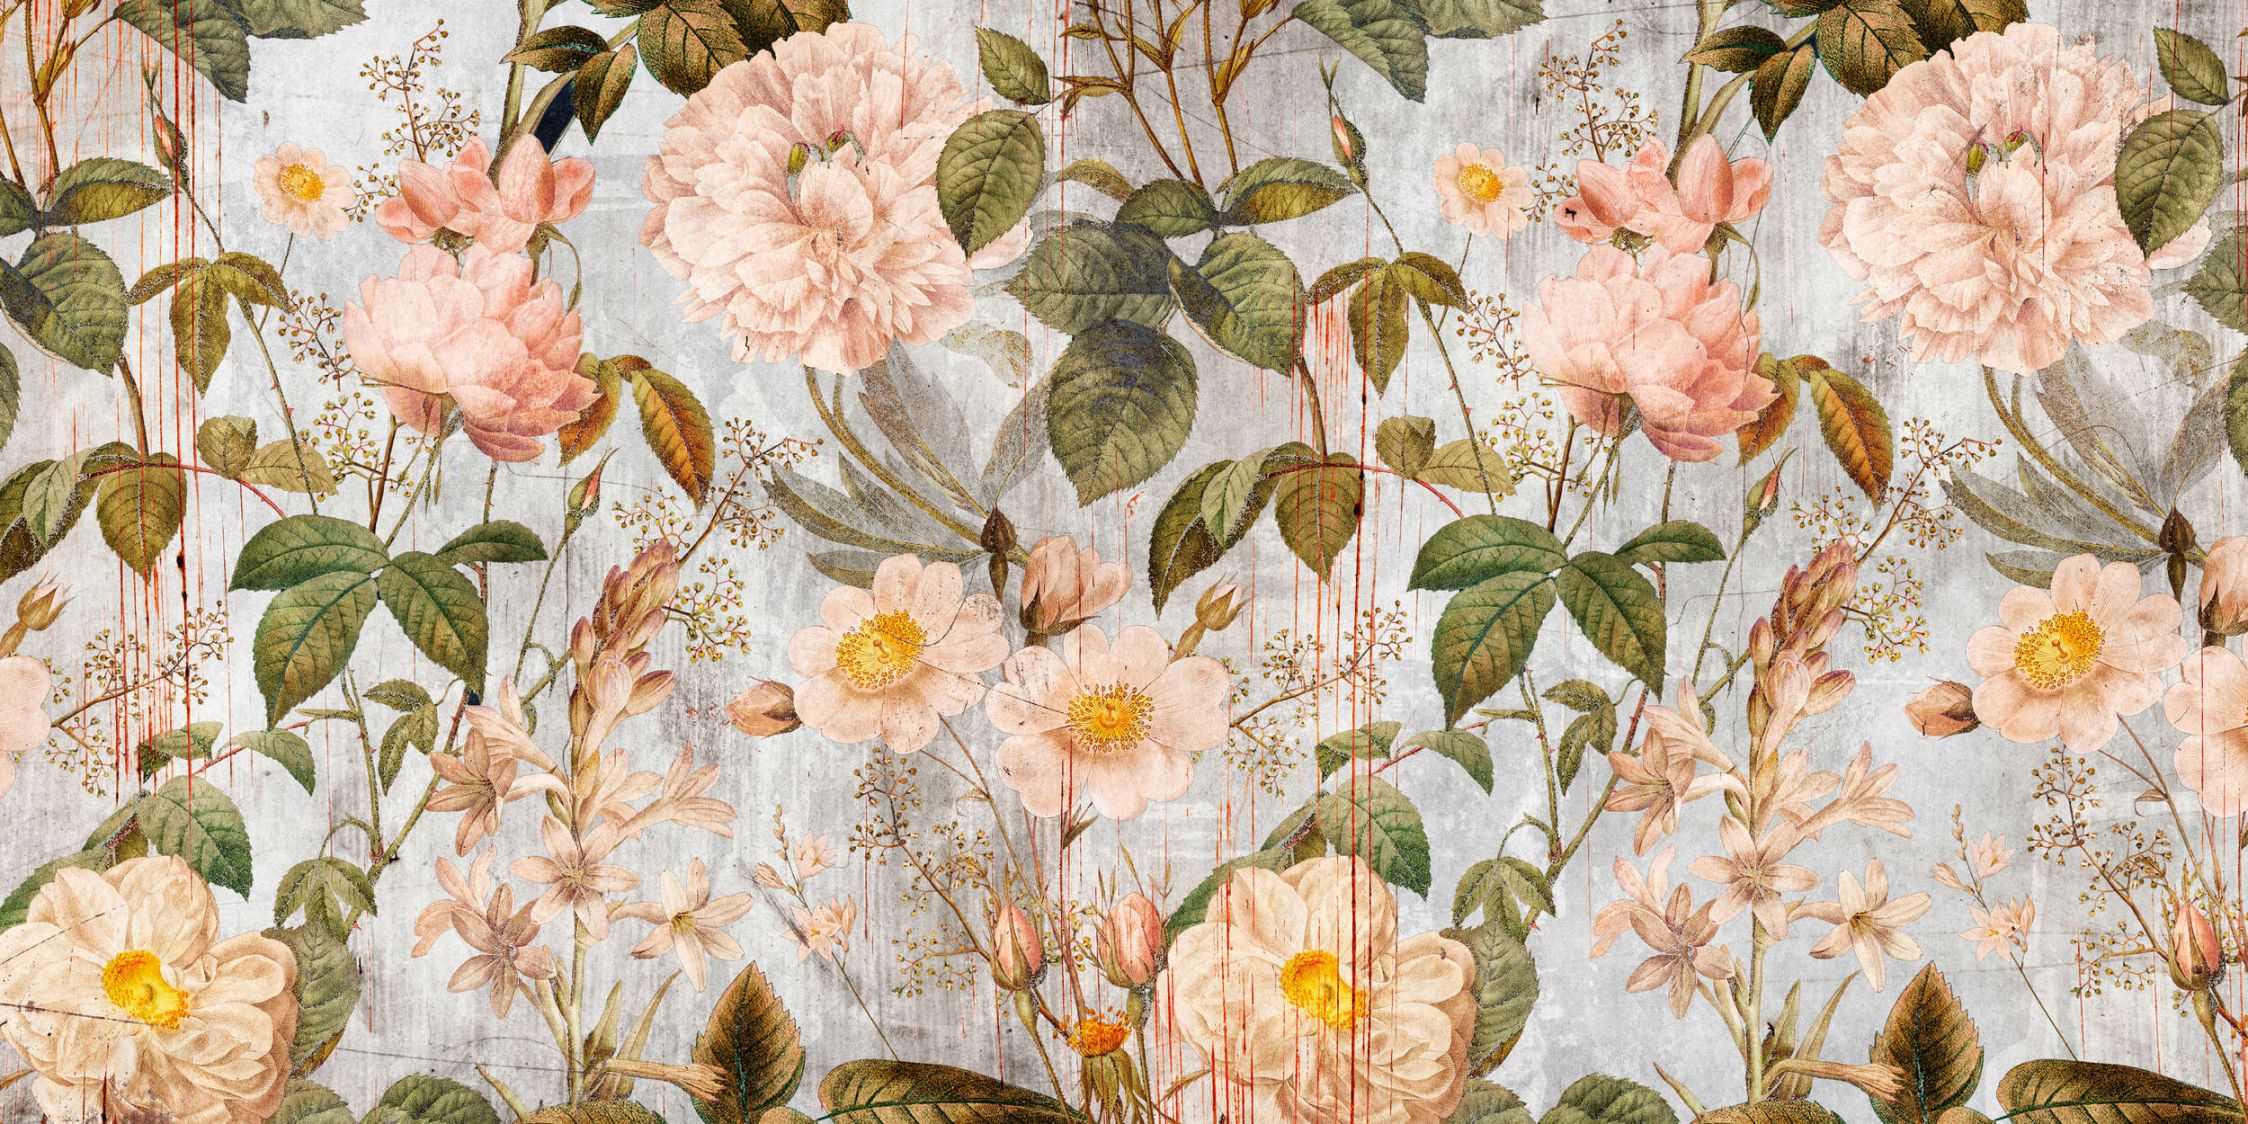             Photo wallpaper »rose« - Vintage-style floral pattern - Smooth, slightly shiny premium non-woven fabric
        